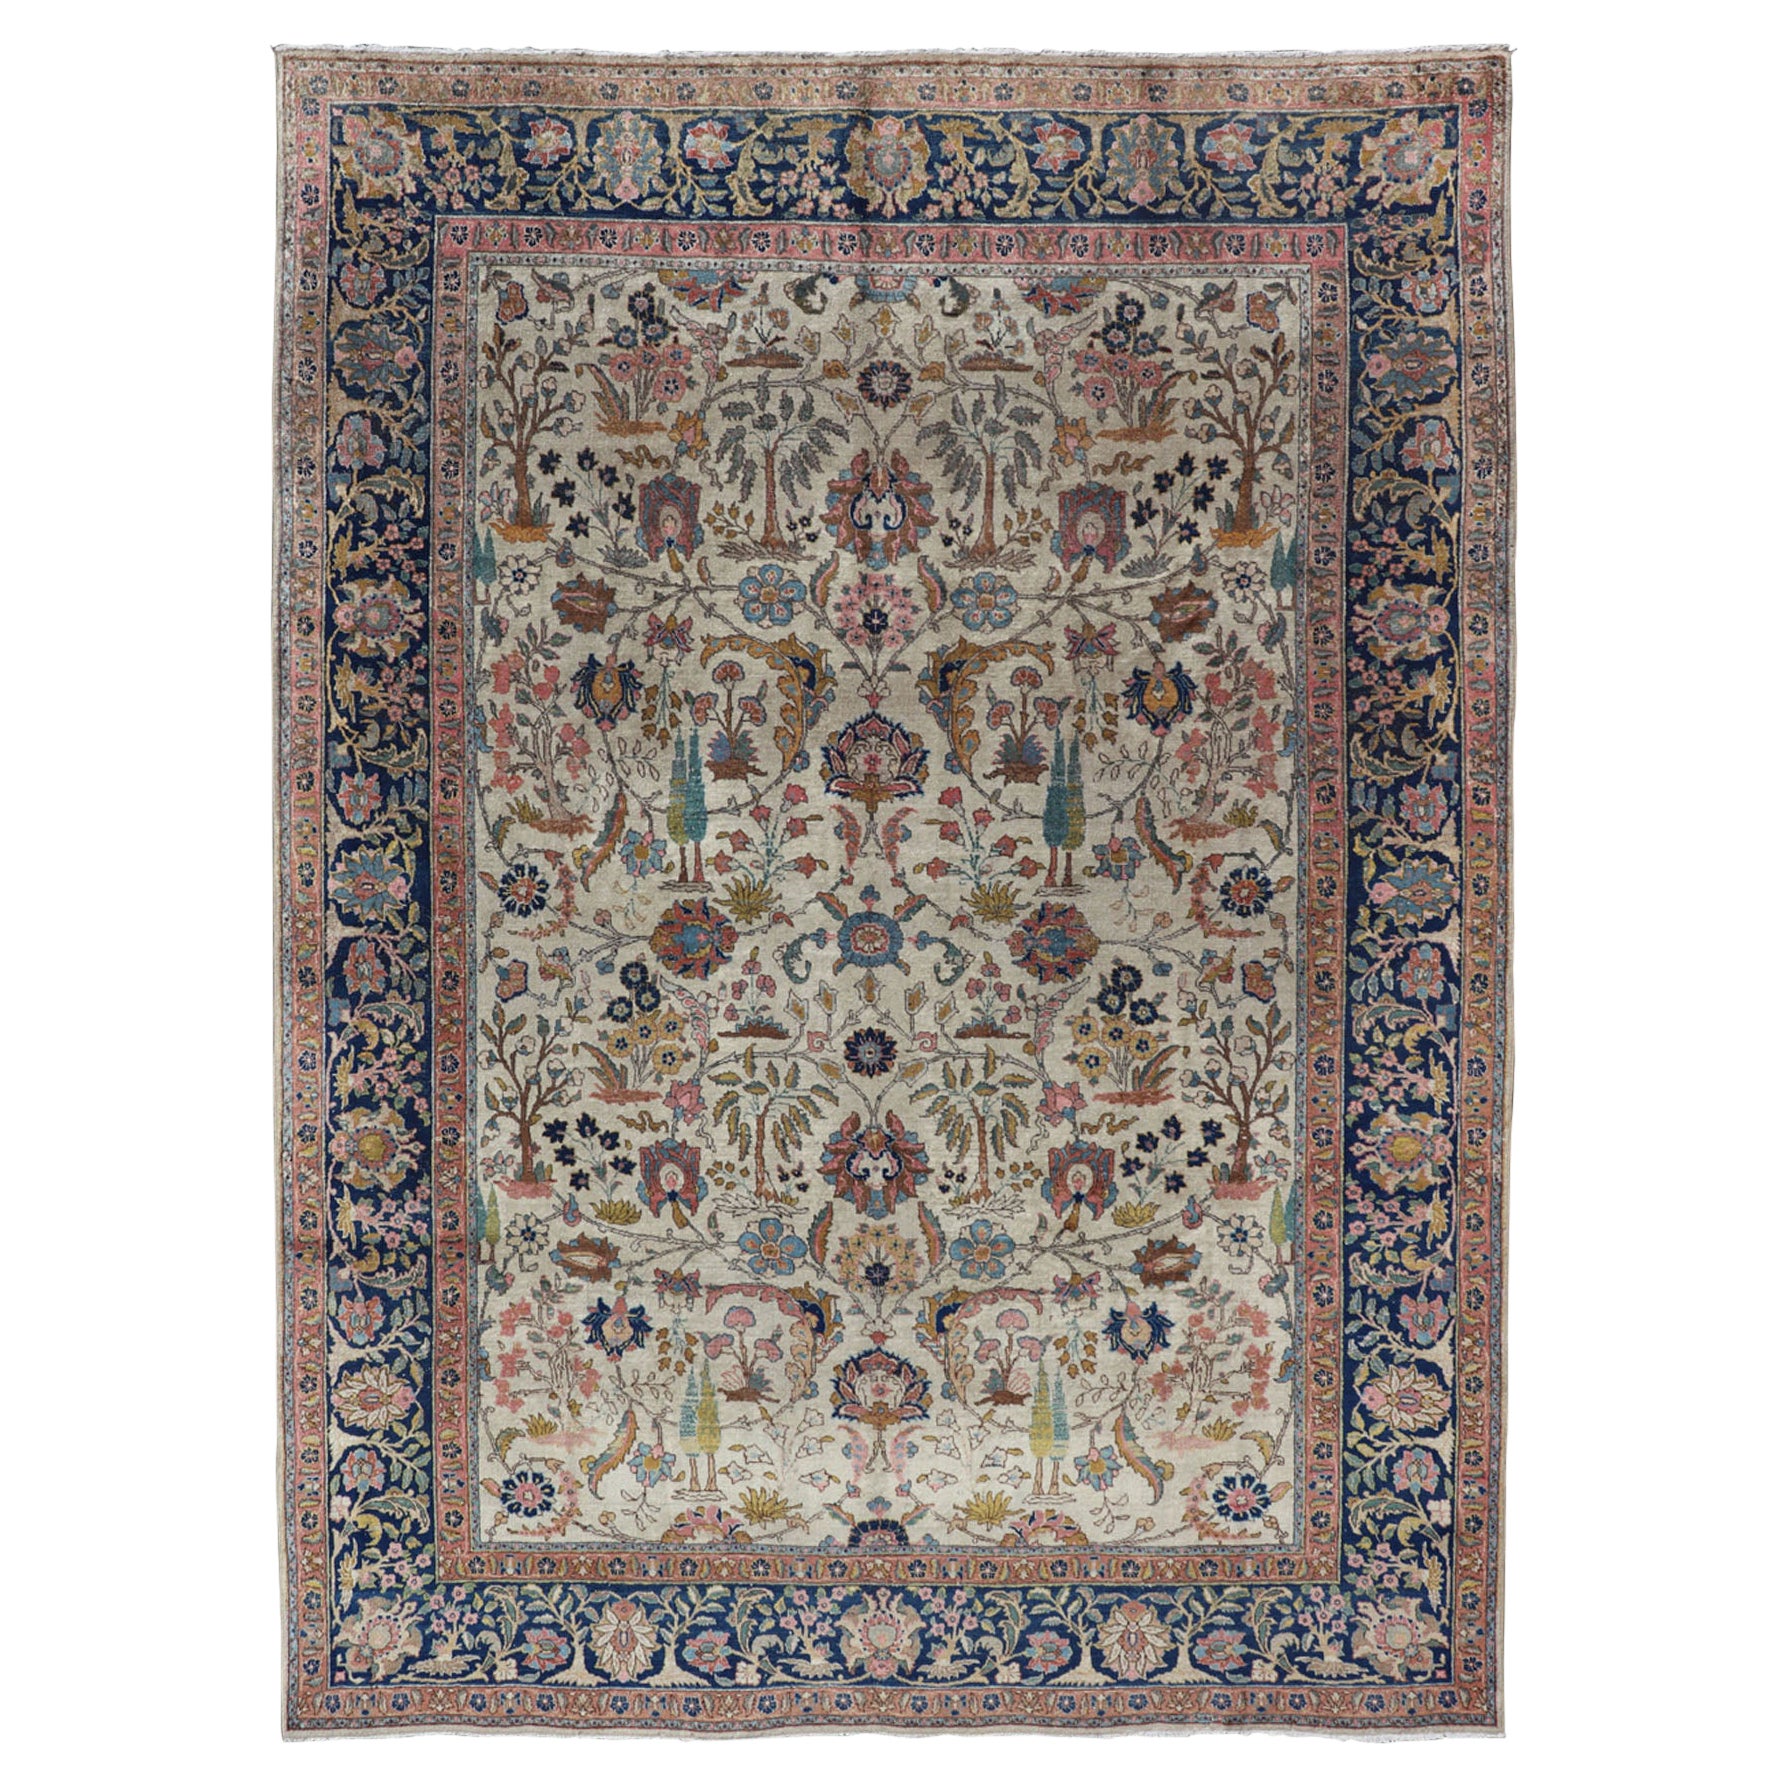 Antique Tabriz with All-Over Floral Sub-Geometric Design & Complementary Border